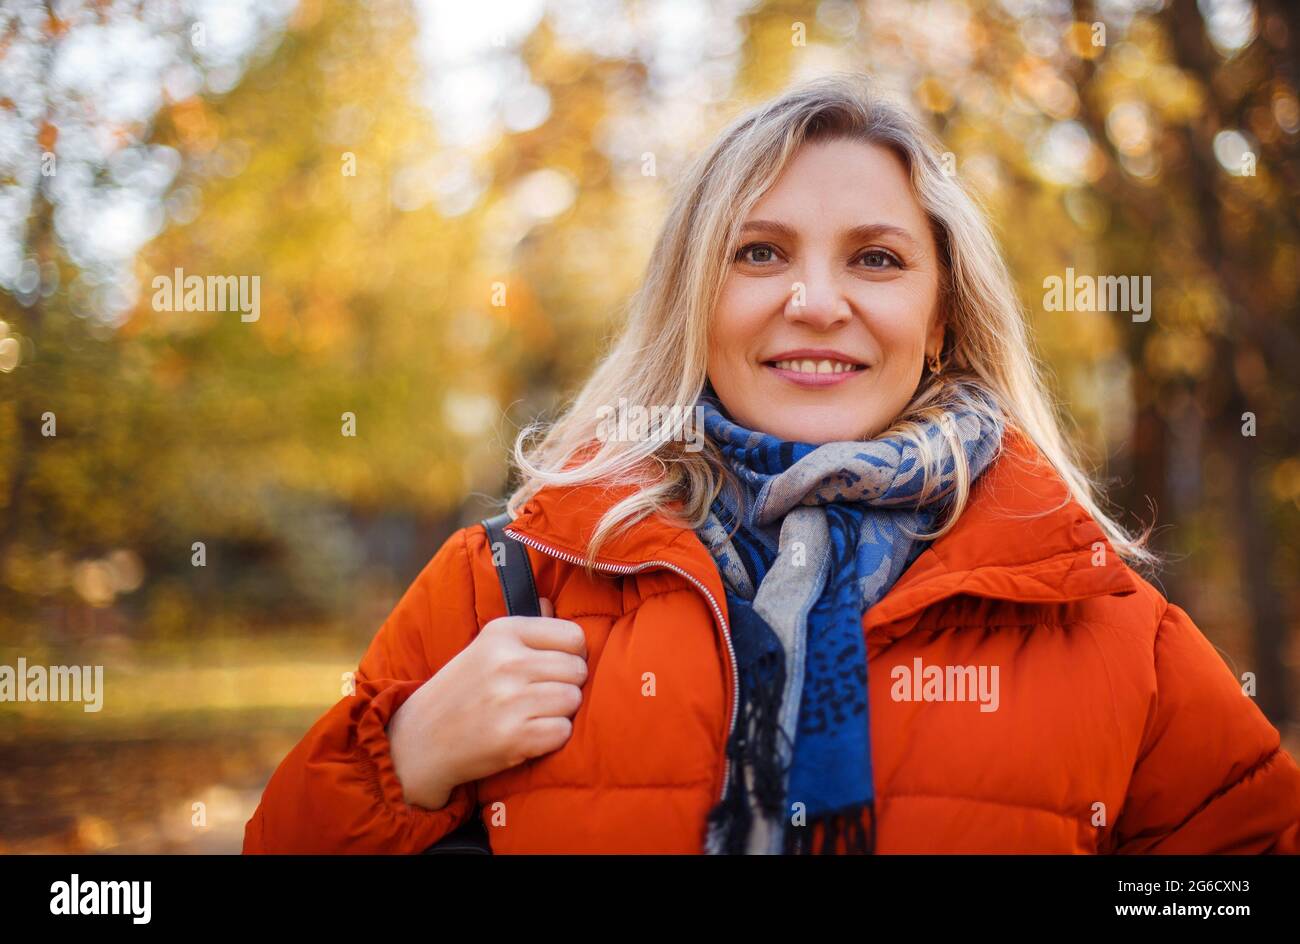 Delighted female in outerwear smiling on sunny weekend day in autumn park Stock Photo